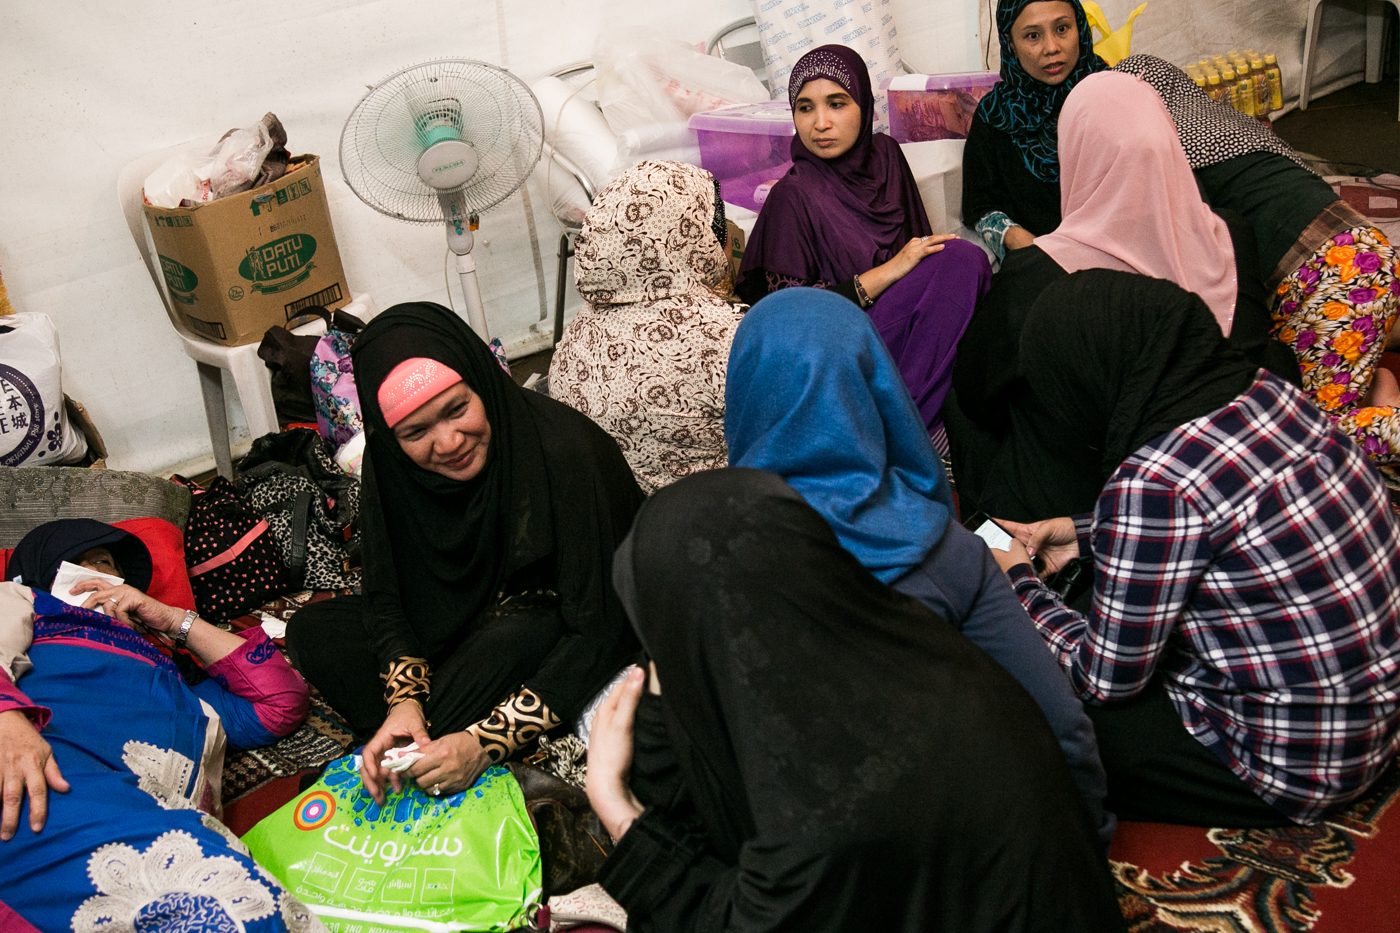 Fatima, a convert and founder of Ramadan Tent, talks to her friends inside the prayer area before Iftar, the nightly breaking of the fast.  